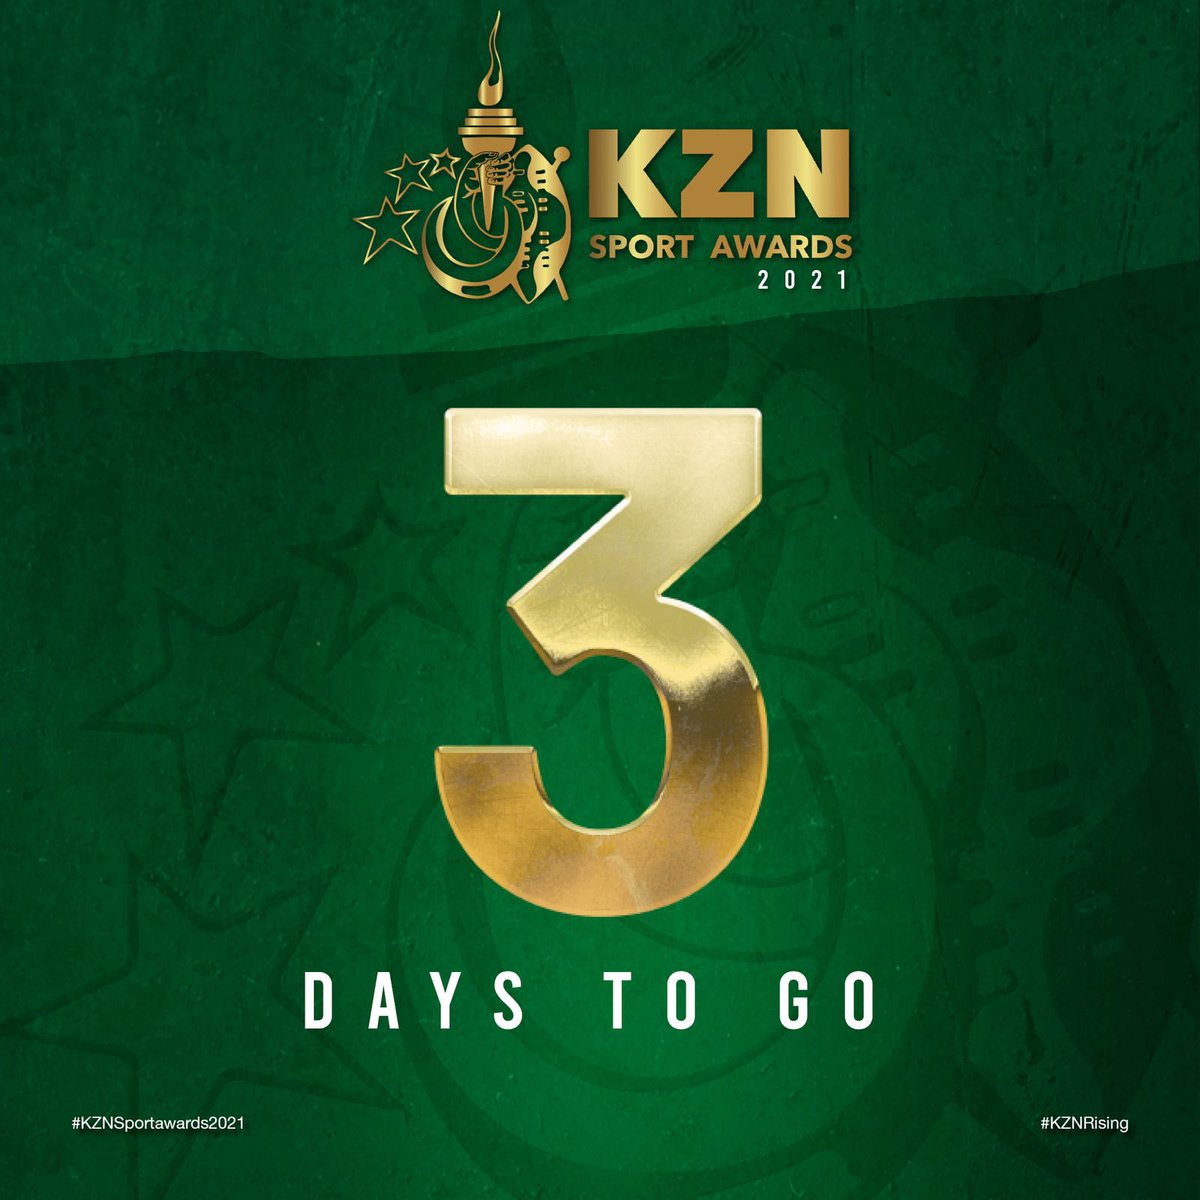 🚨3 MORE DAYS left🚨 KZN Sport Awards are just around the corner. Are you ready and excited for the big event as we are? Don’t forget to vote for your sport personality of the year. Visit kzndsr.gov.za. Uthi ubani umpetha, who’s ur champ? #OmpethaBethu #OurChampions